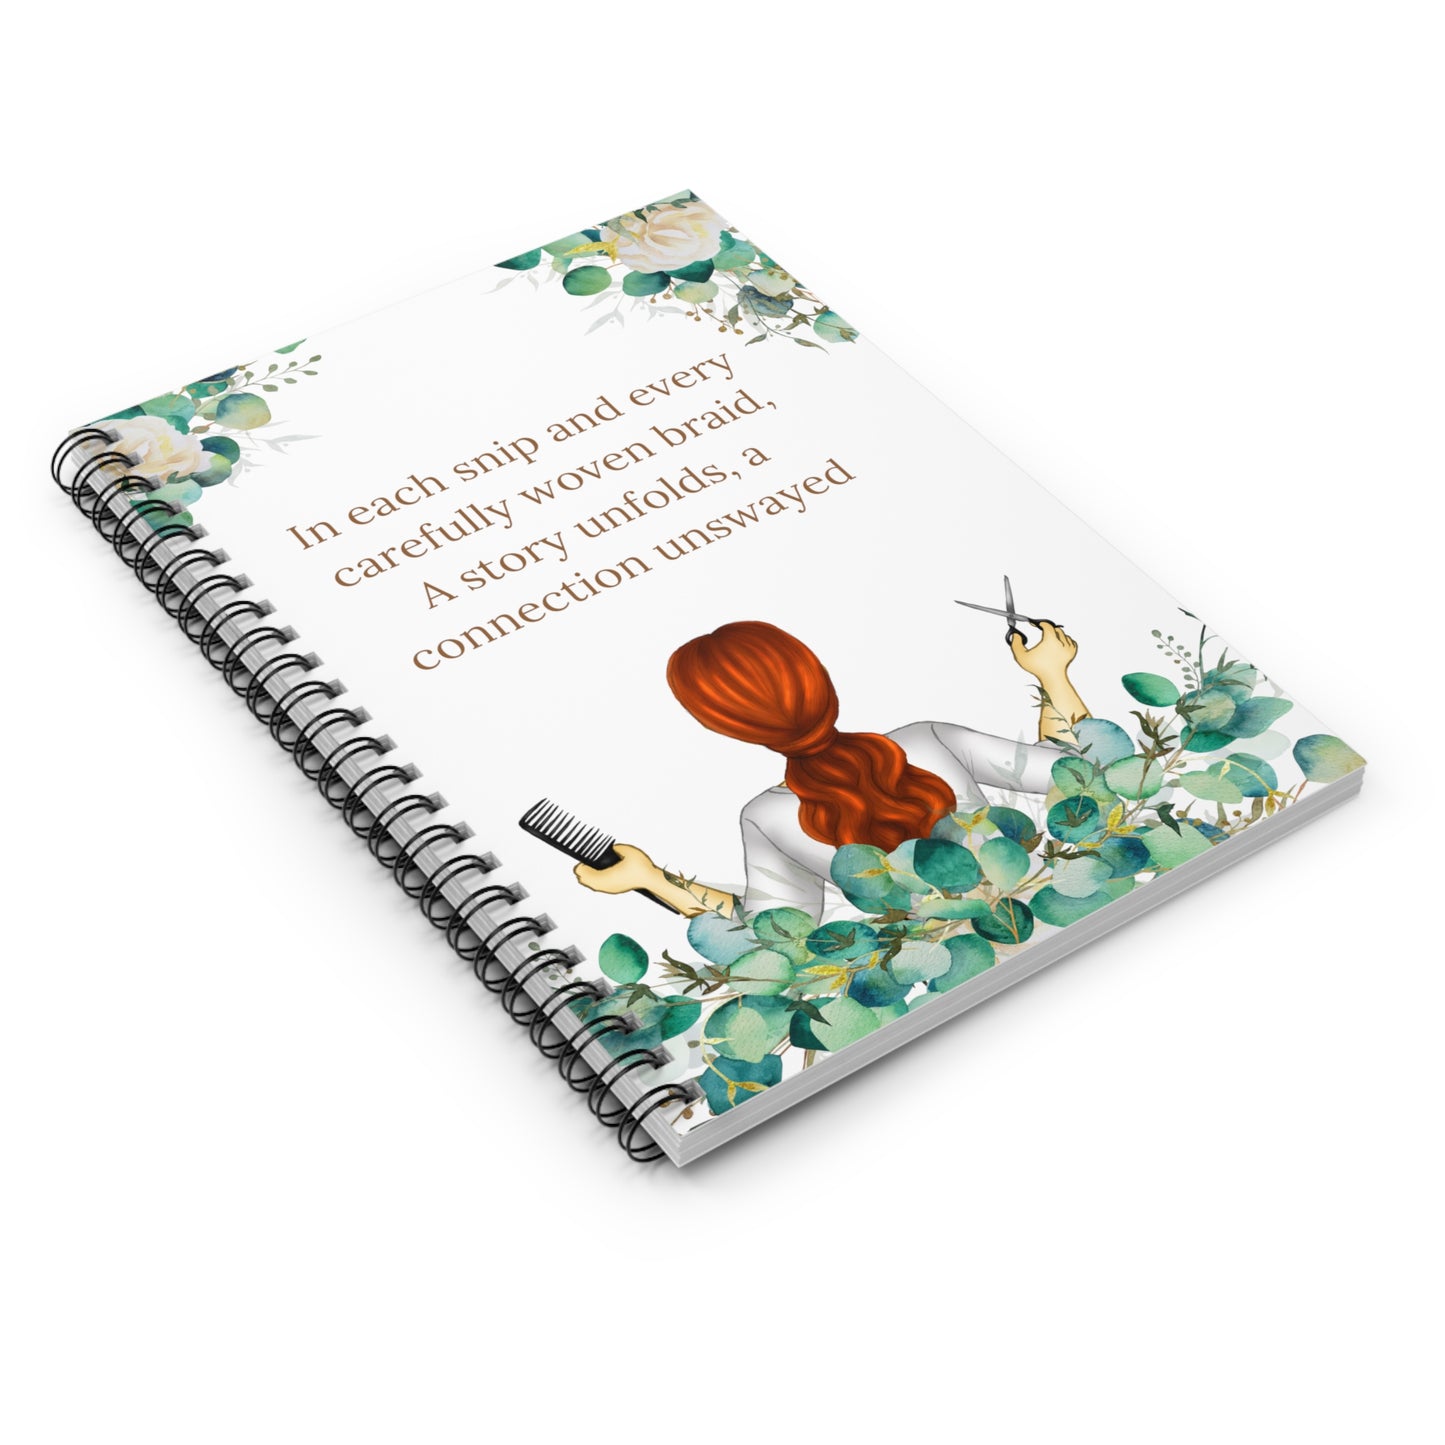 Snip in Time: Spiral Notebook - Log Books - Journals - Diaries - and More Custom Printed by TheGlassyLass